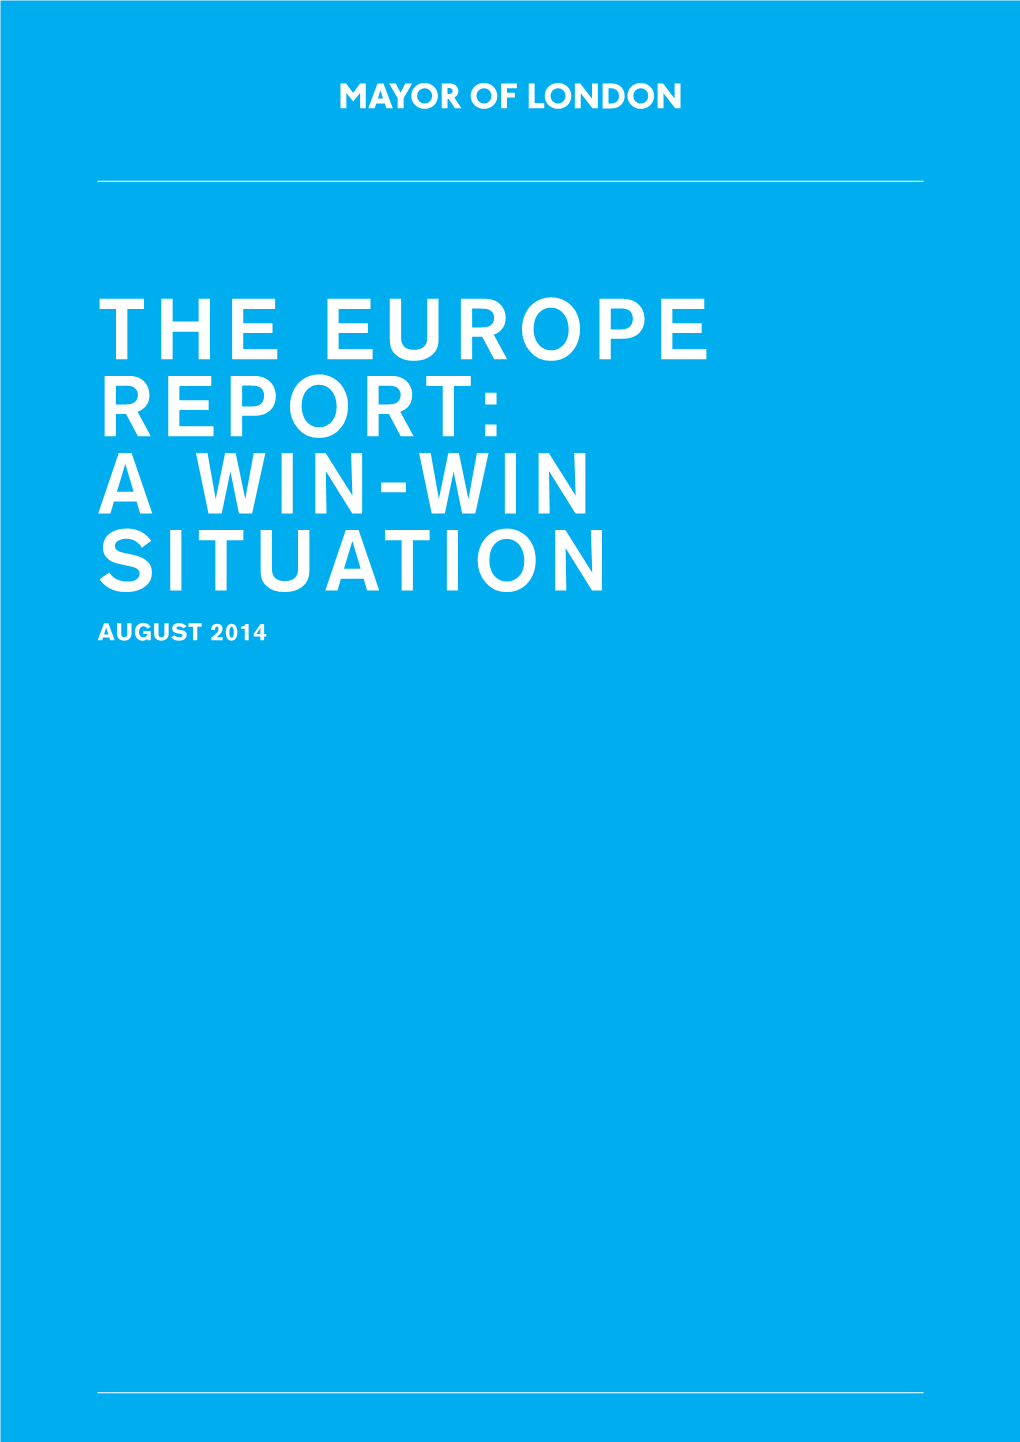 The Europe Report: a Win-Win Situation AUGUST 2014 the Europe Report: a Win-Win Situation the Europe Report: a Win-Win Situation 3